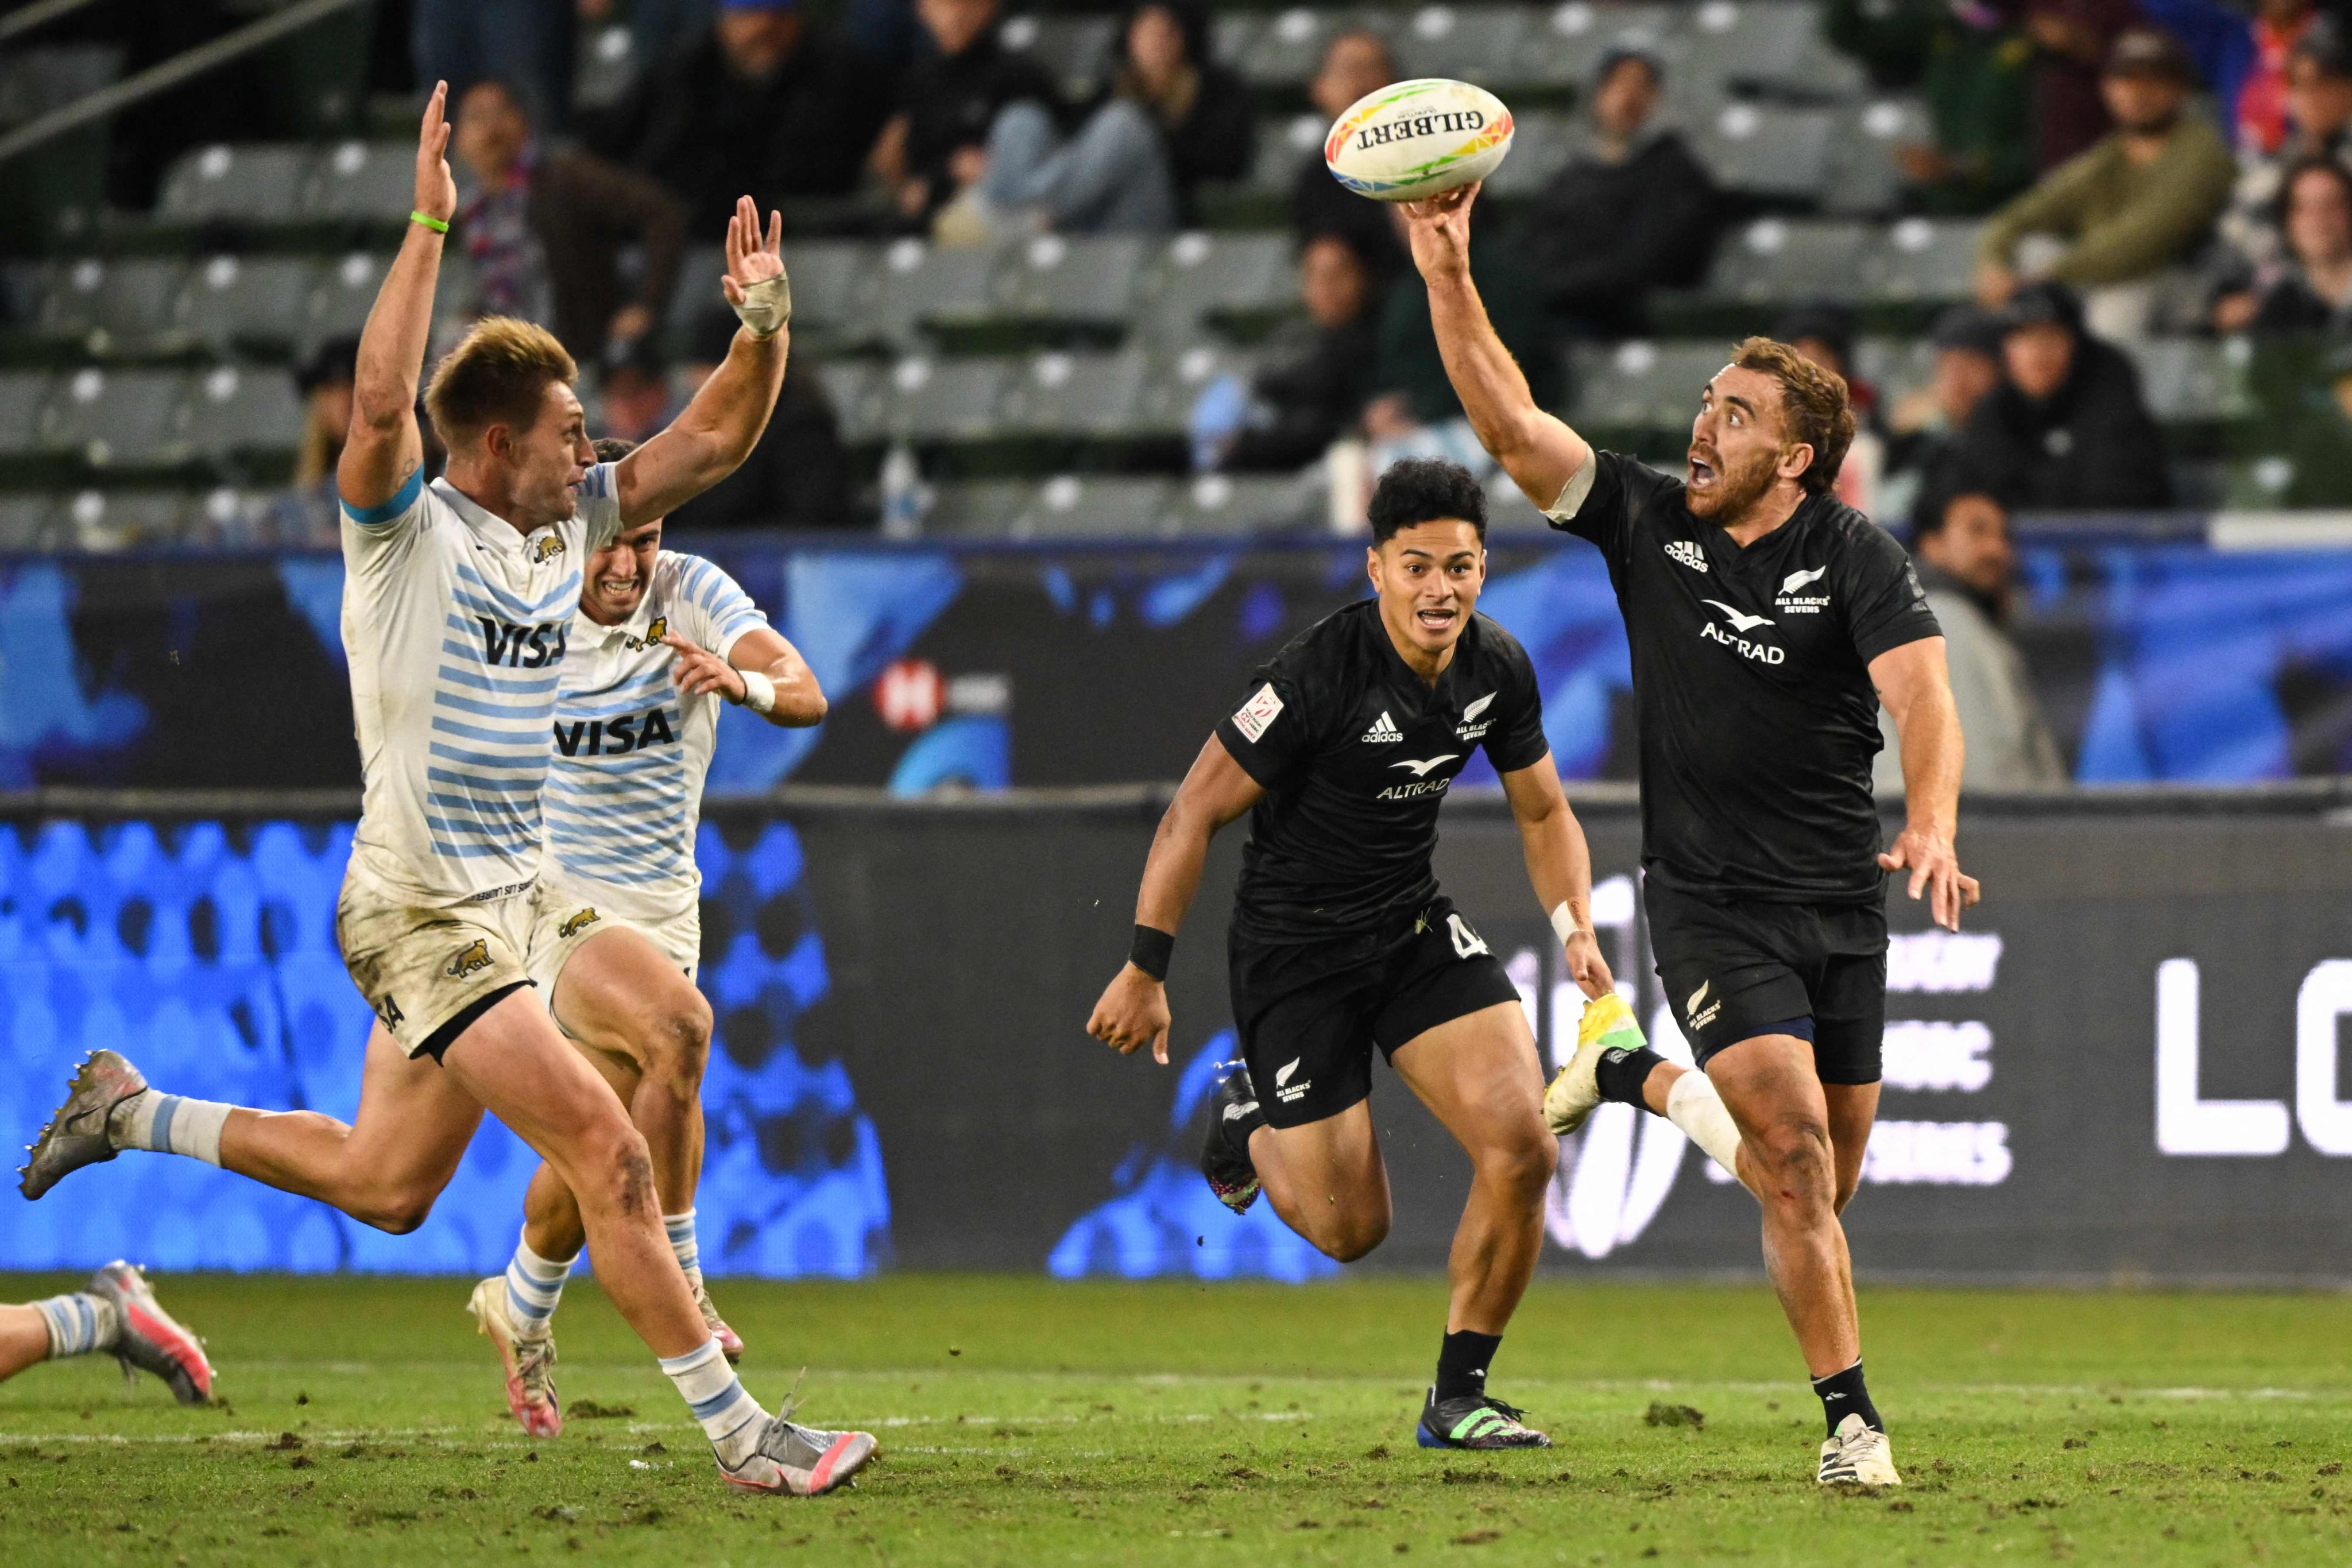 New Zealand’s Joe Webber passes the ball during his side’s sevens final against Argentina at Dignity Health Sports Park in Carson, California. Photo: AFP